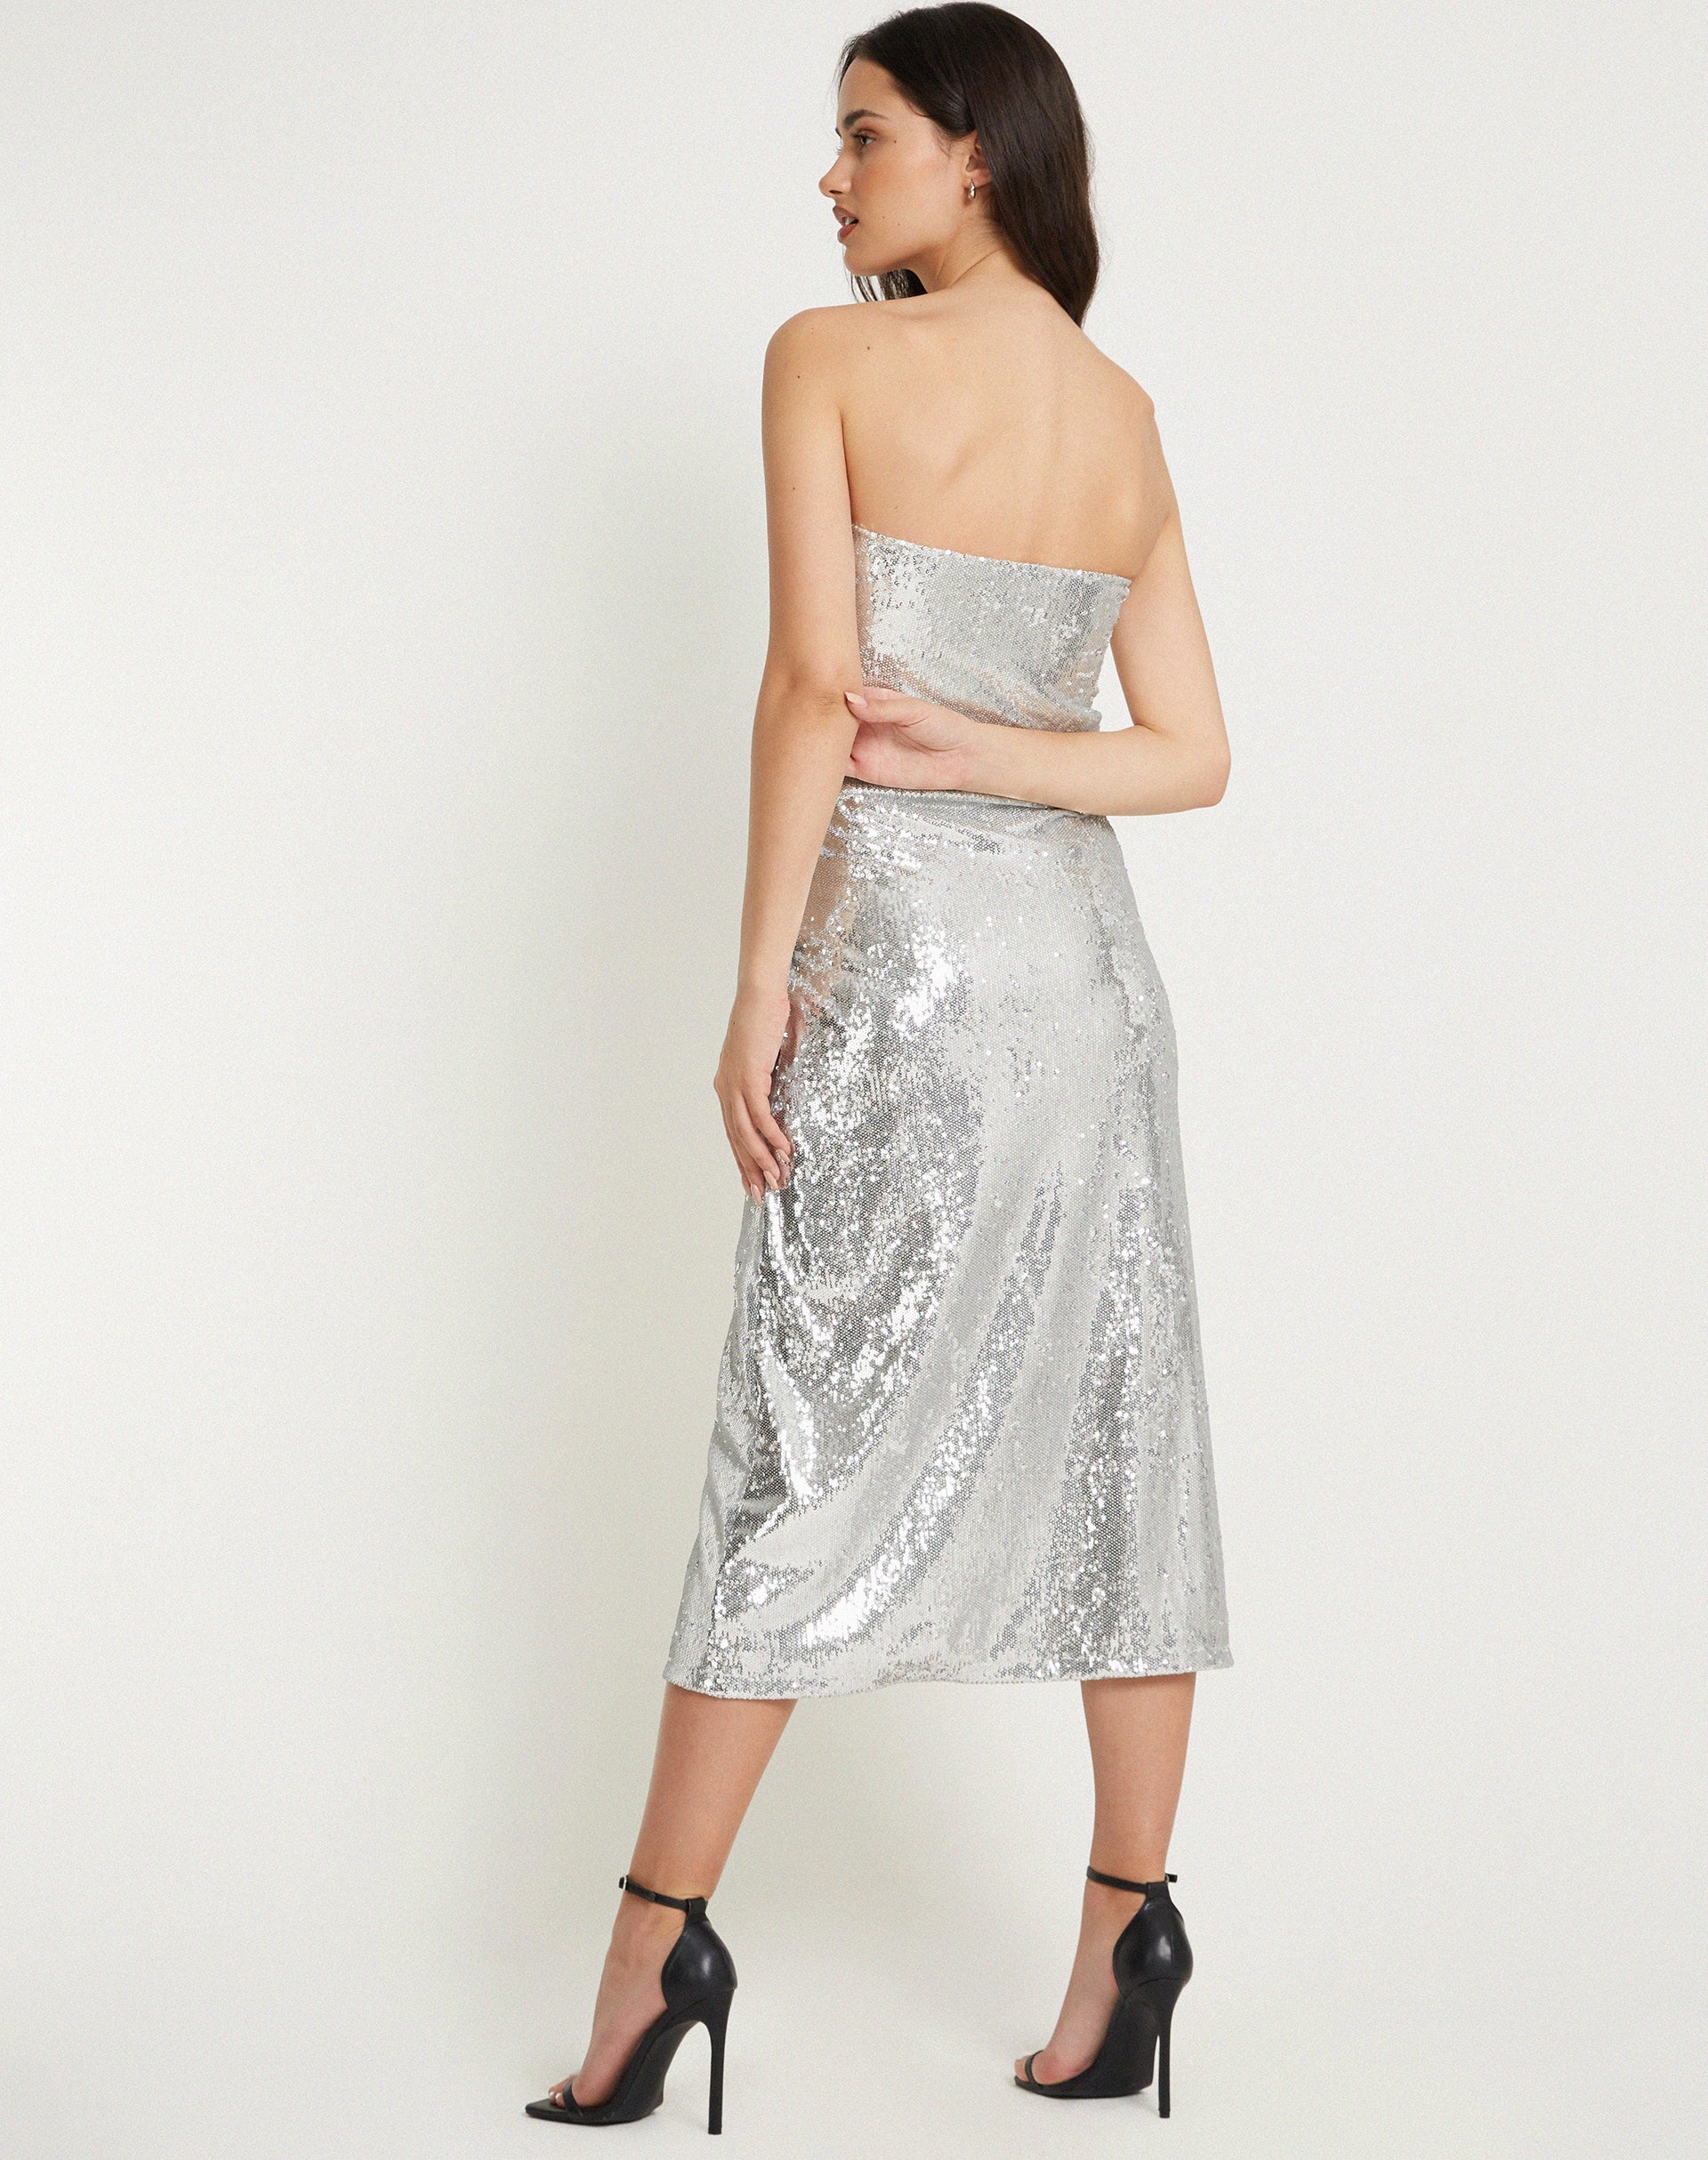 Image of Cleosa Bandeau Maxi dress in Silver Chrome